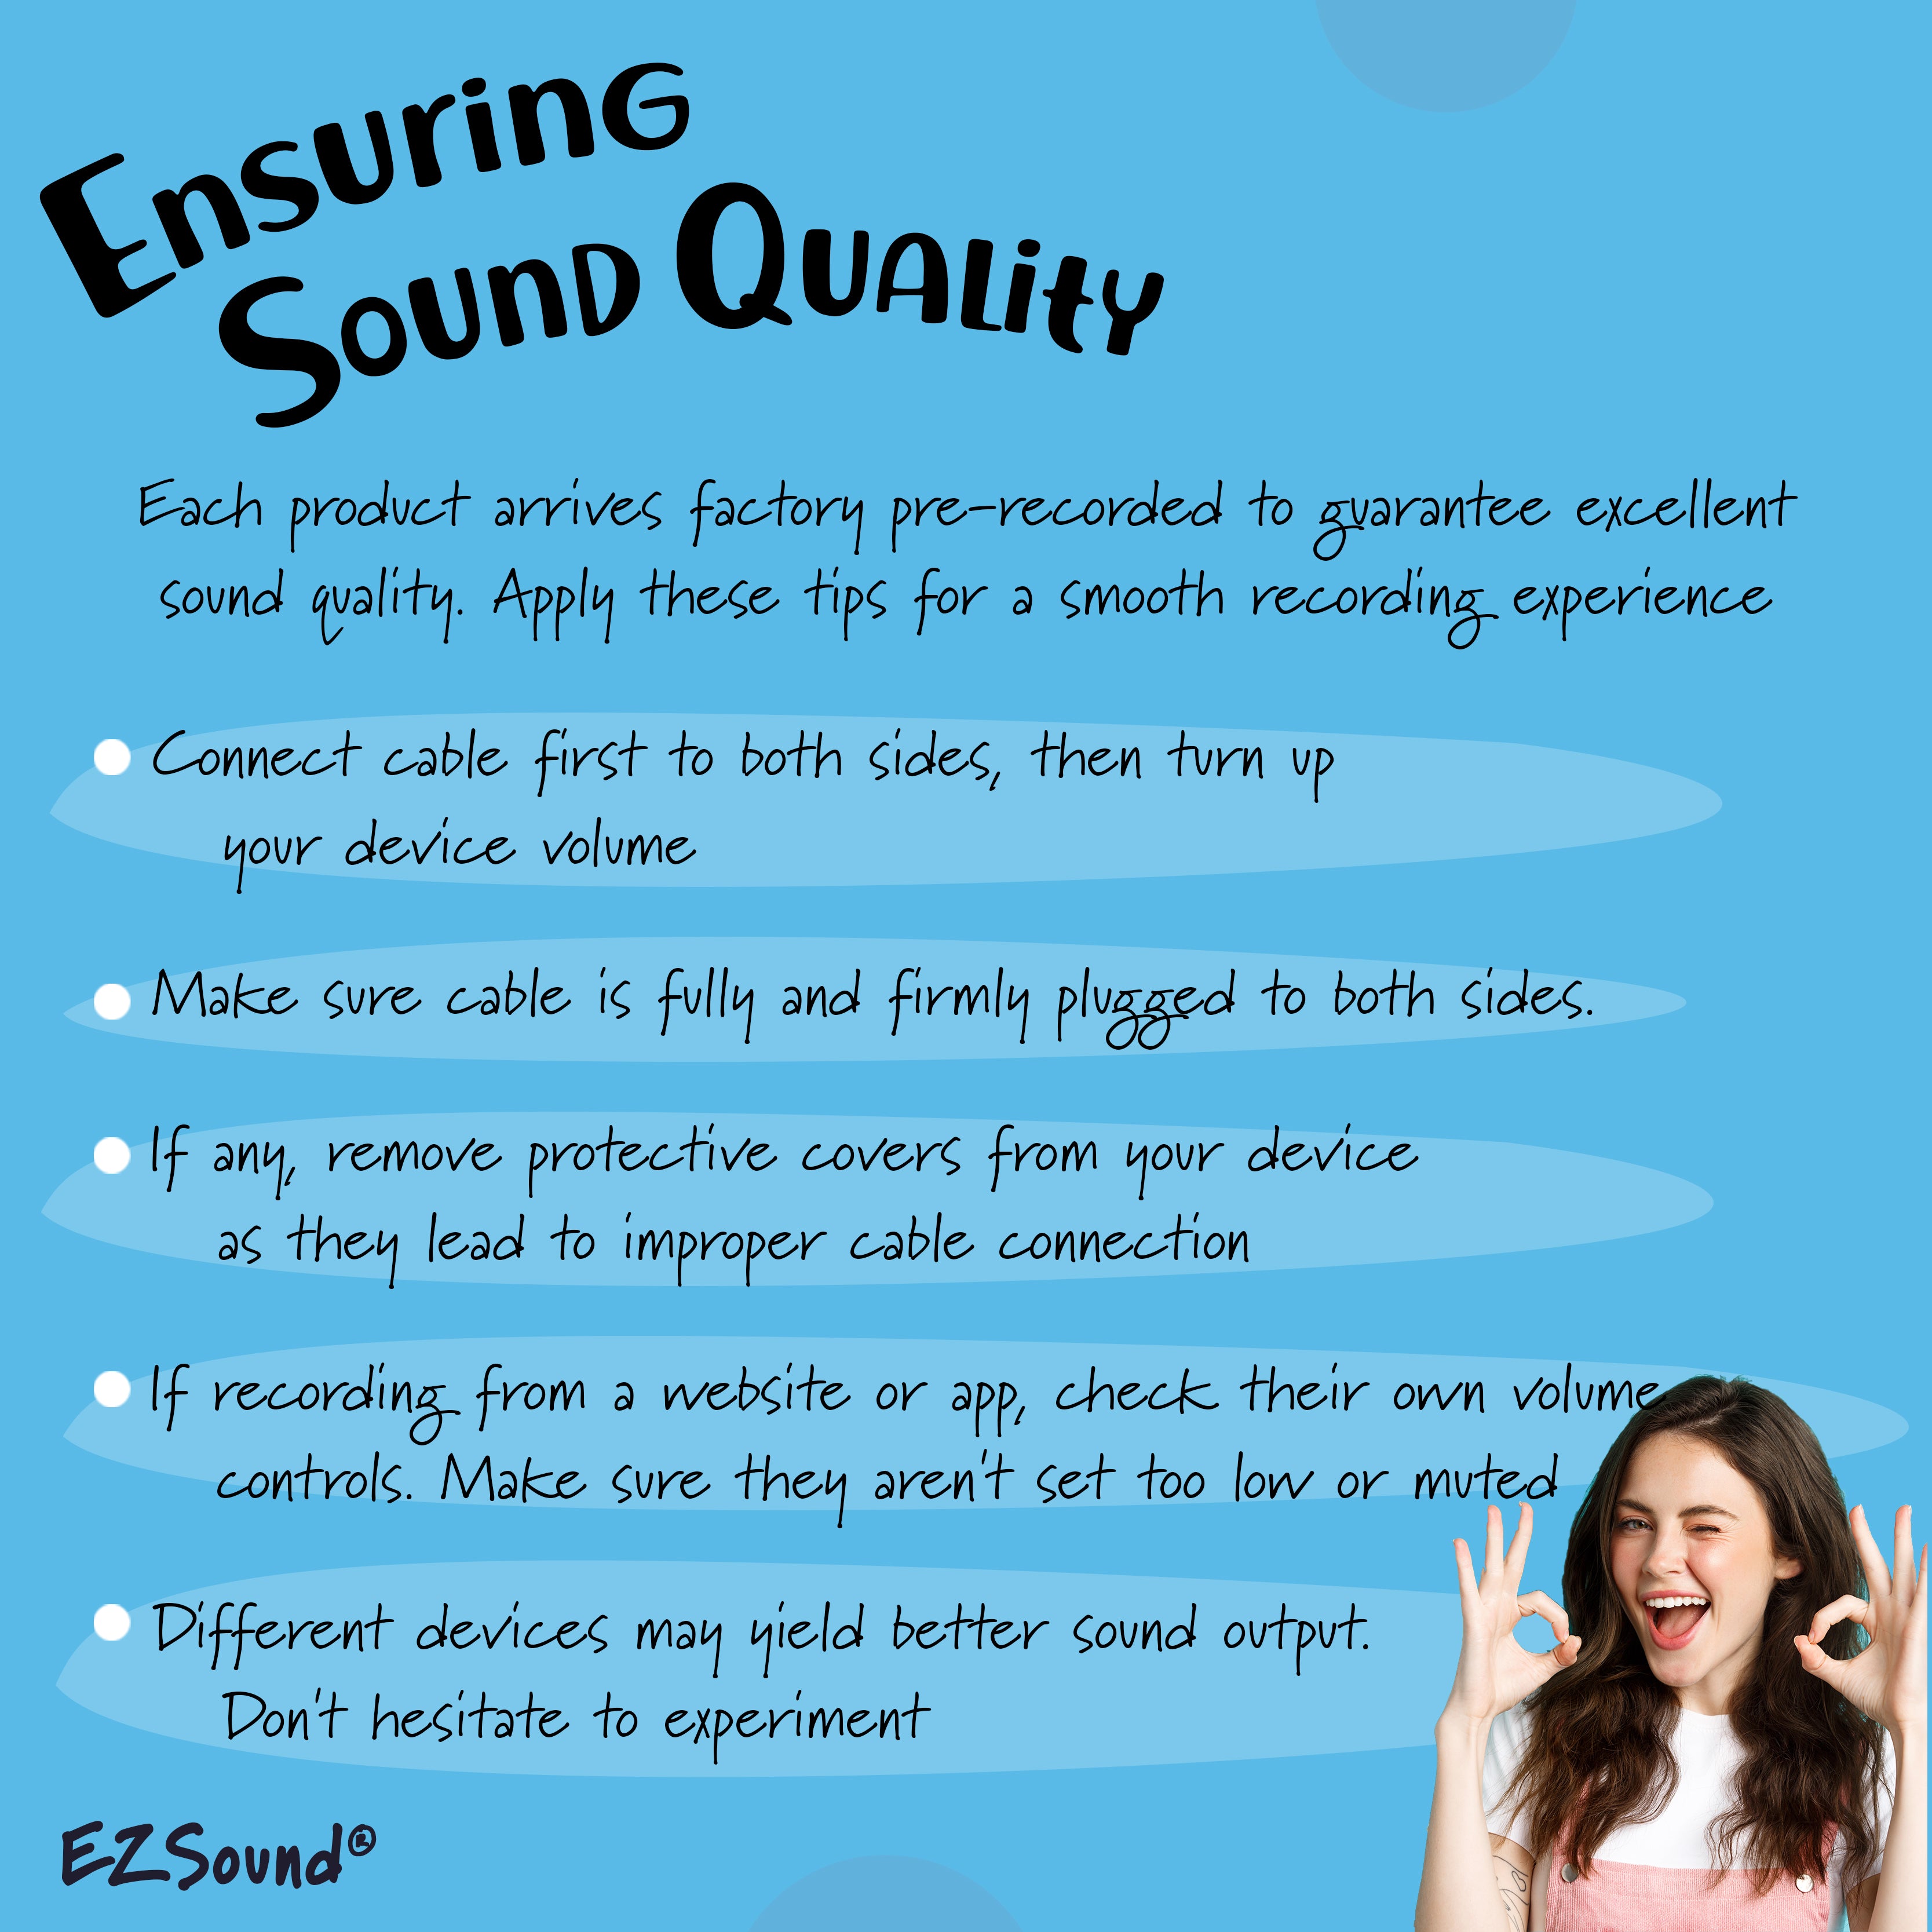 EZSound - Sound Chip for Greeting Card